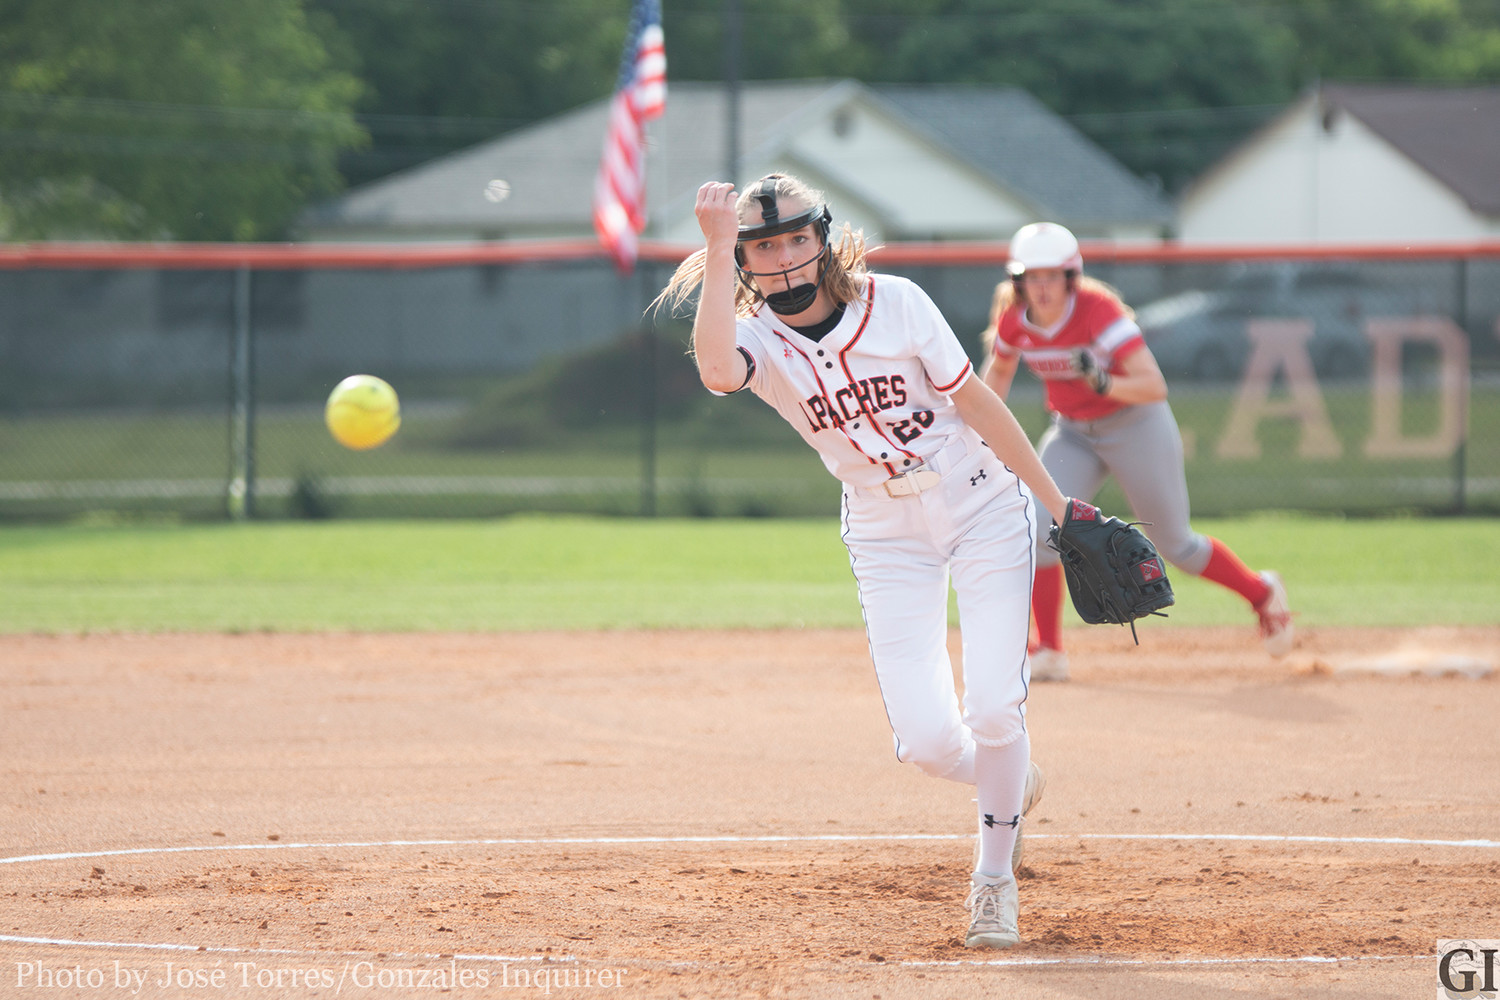 Freshman Shelby Davis took to the mound Friday, pitching four innings in a 12-0 loss to Fredericksburg.